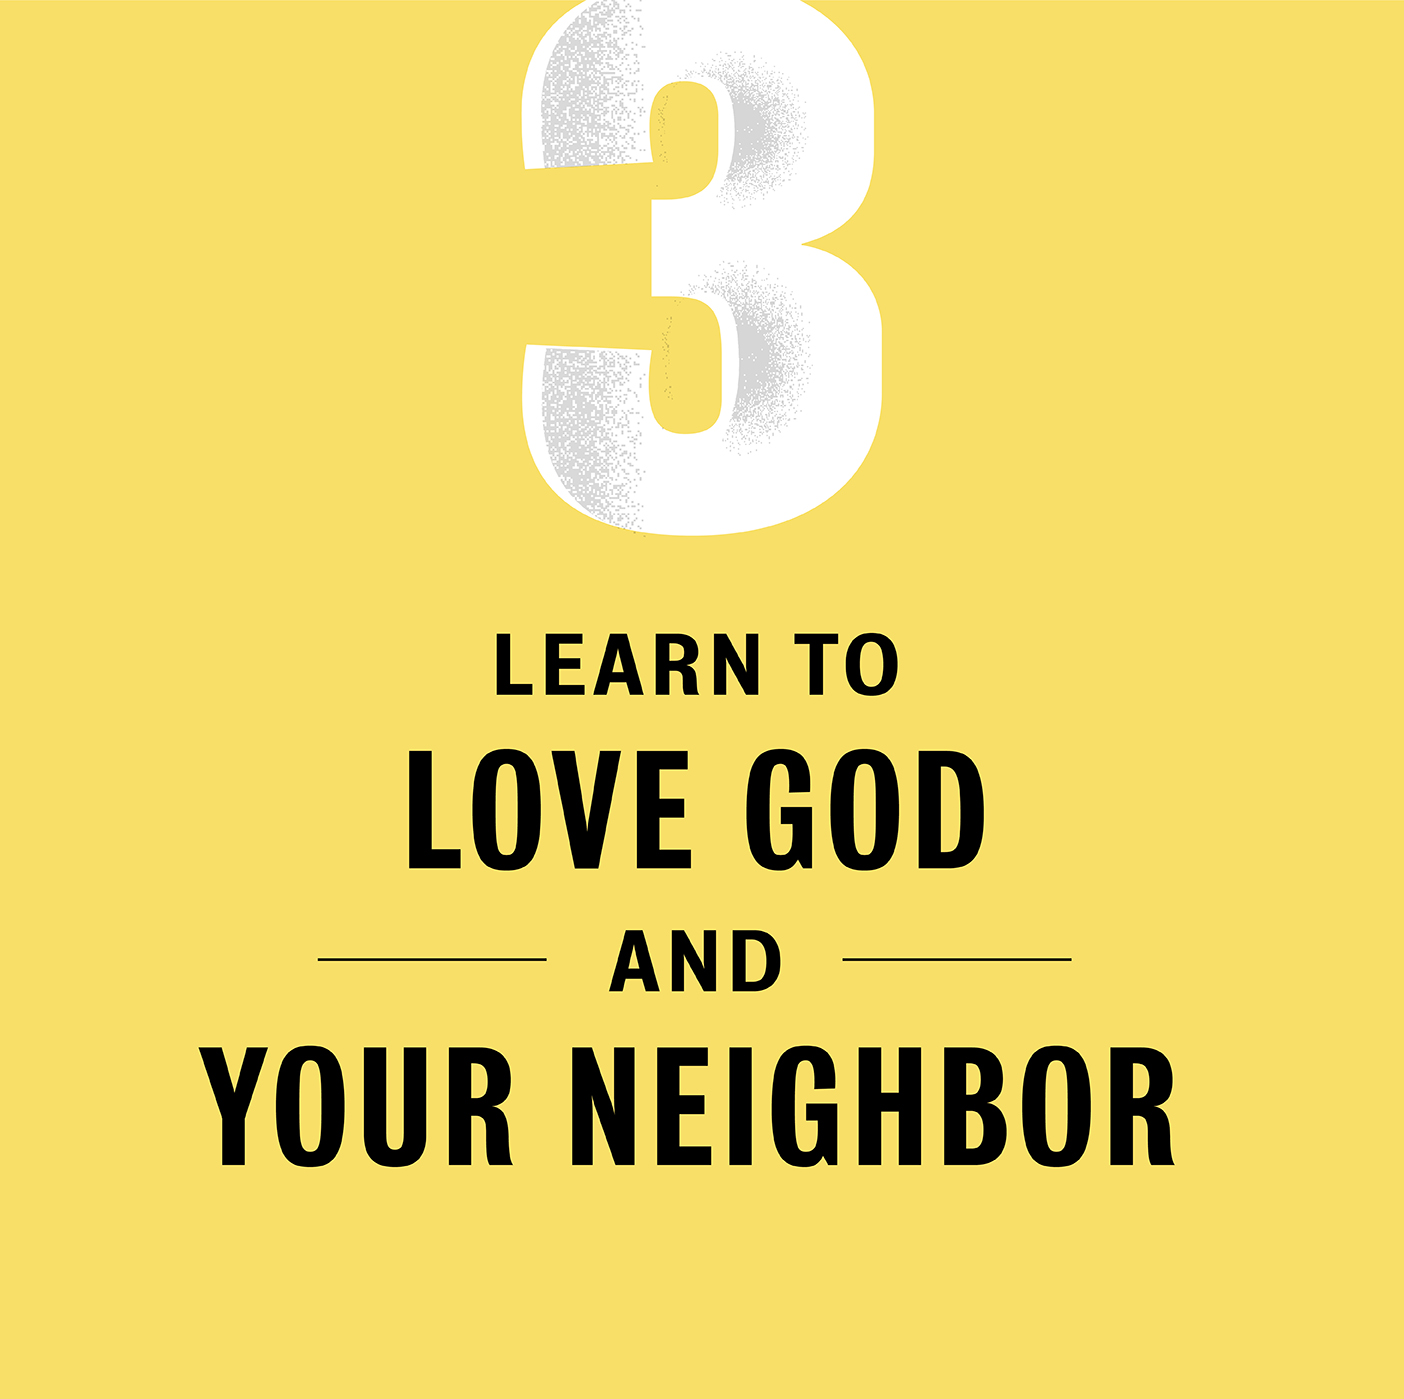 A yellow box that says "3. Learn to love God and your neighbor."